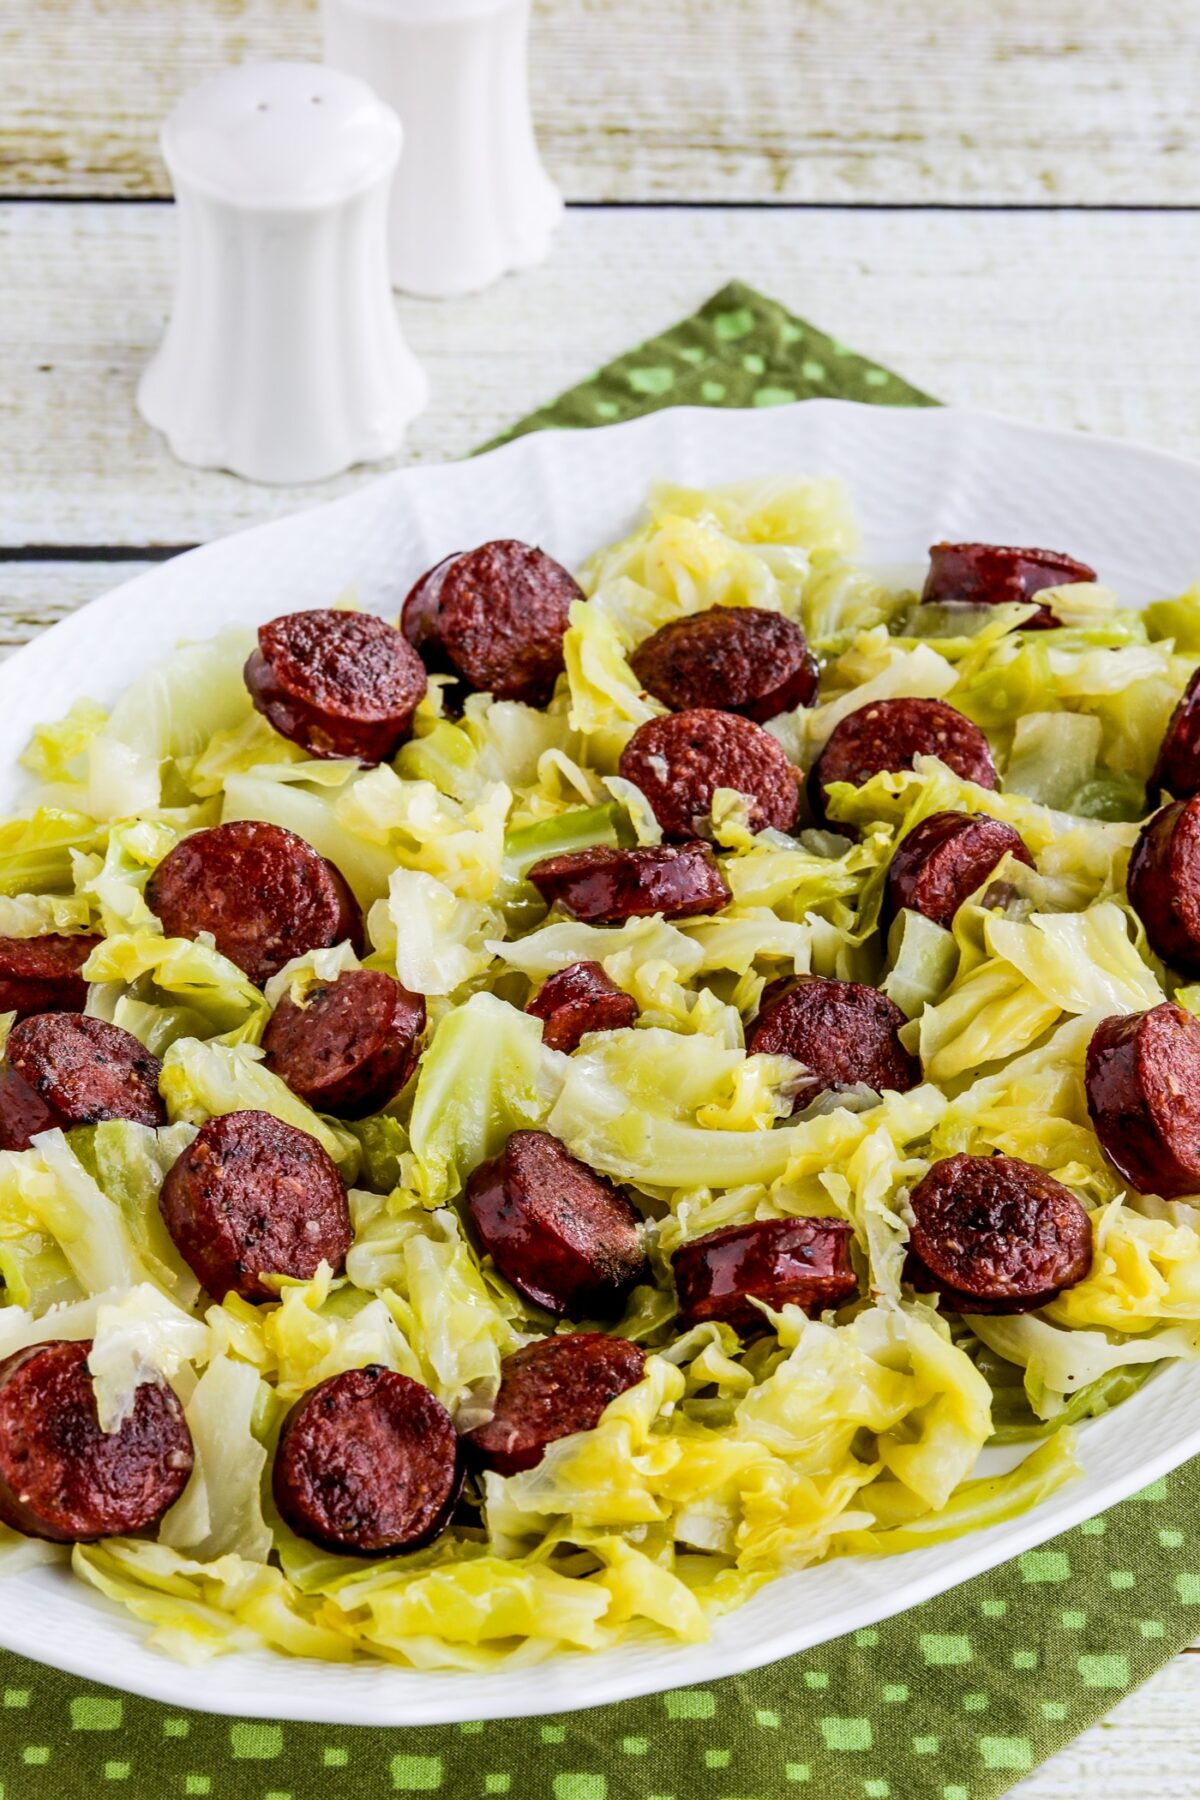 Instant Pot Cabbage and Sausage close-up photo on serving plate